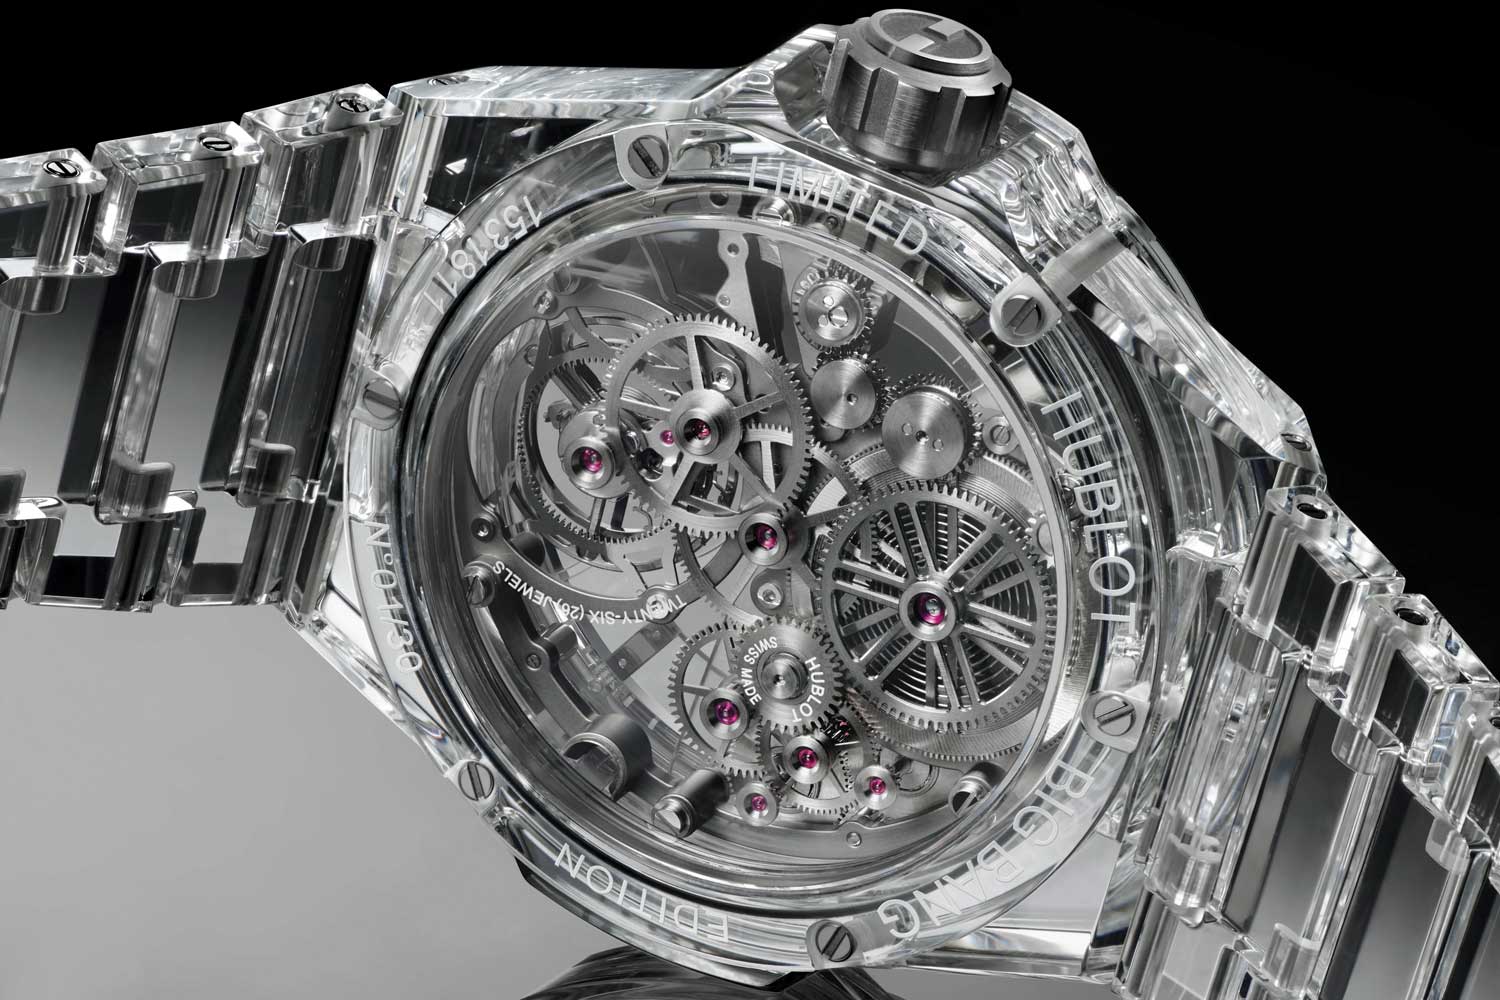 With the Big Bang Integral Tourbillon Full Sapphire, Hublot focussed on omitting all of the normally visible screws